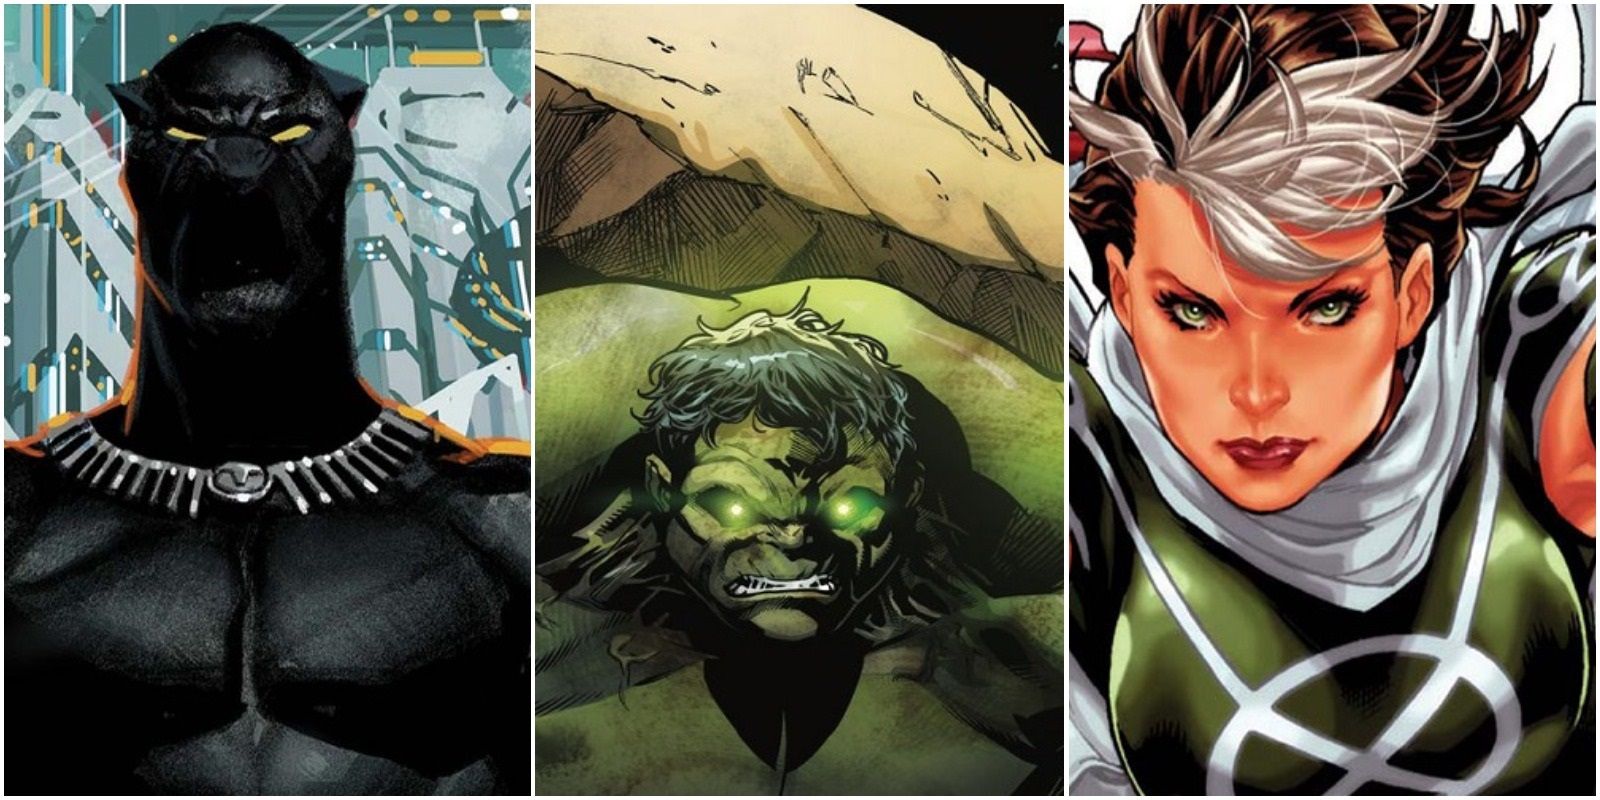 Black Panther, The Hulk, and Rogue all need their powers in a fight.